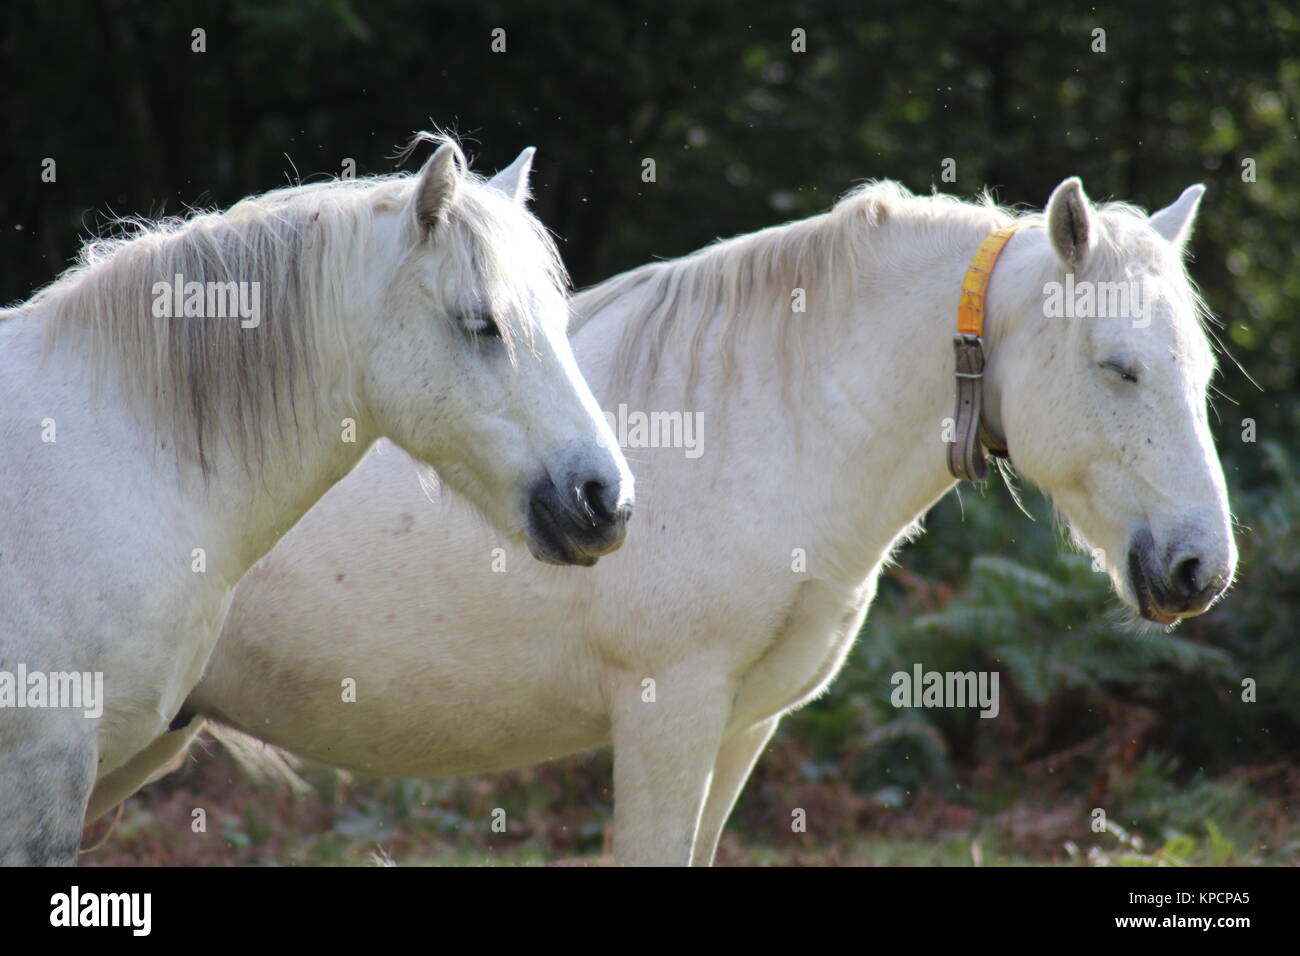 Wild ponies on Dartmoor, pony with tracking collar, tracking collar, Stock Photo